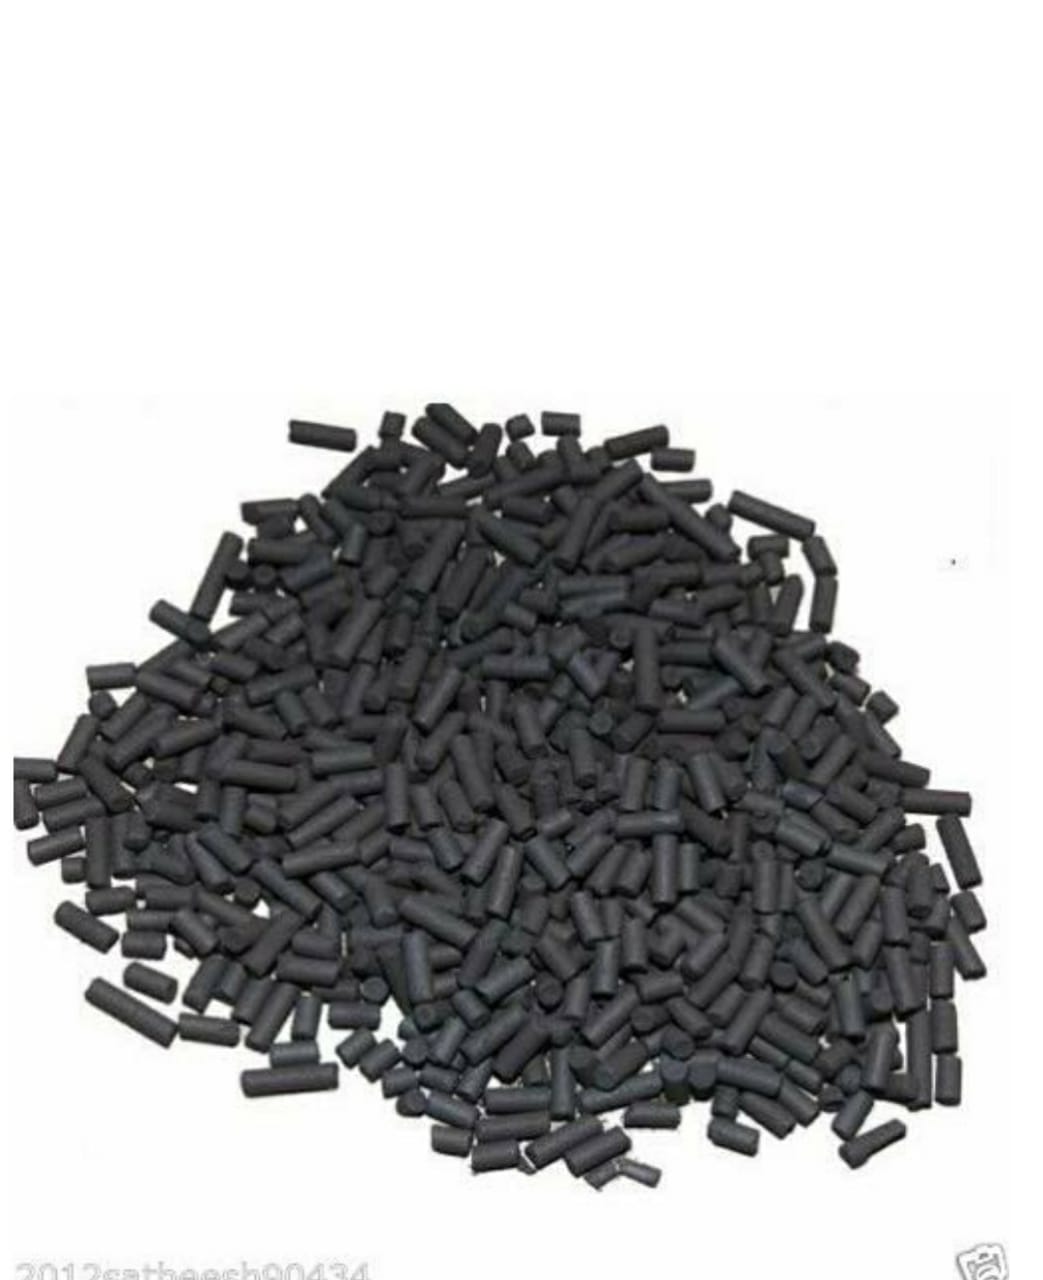 Activated carbon (Filter Media)